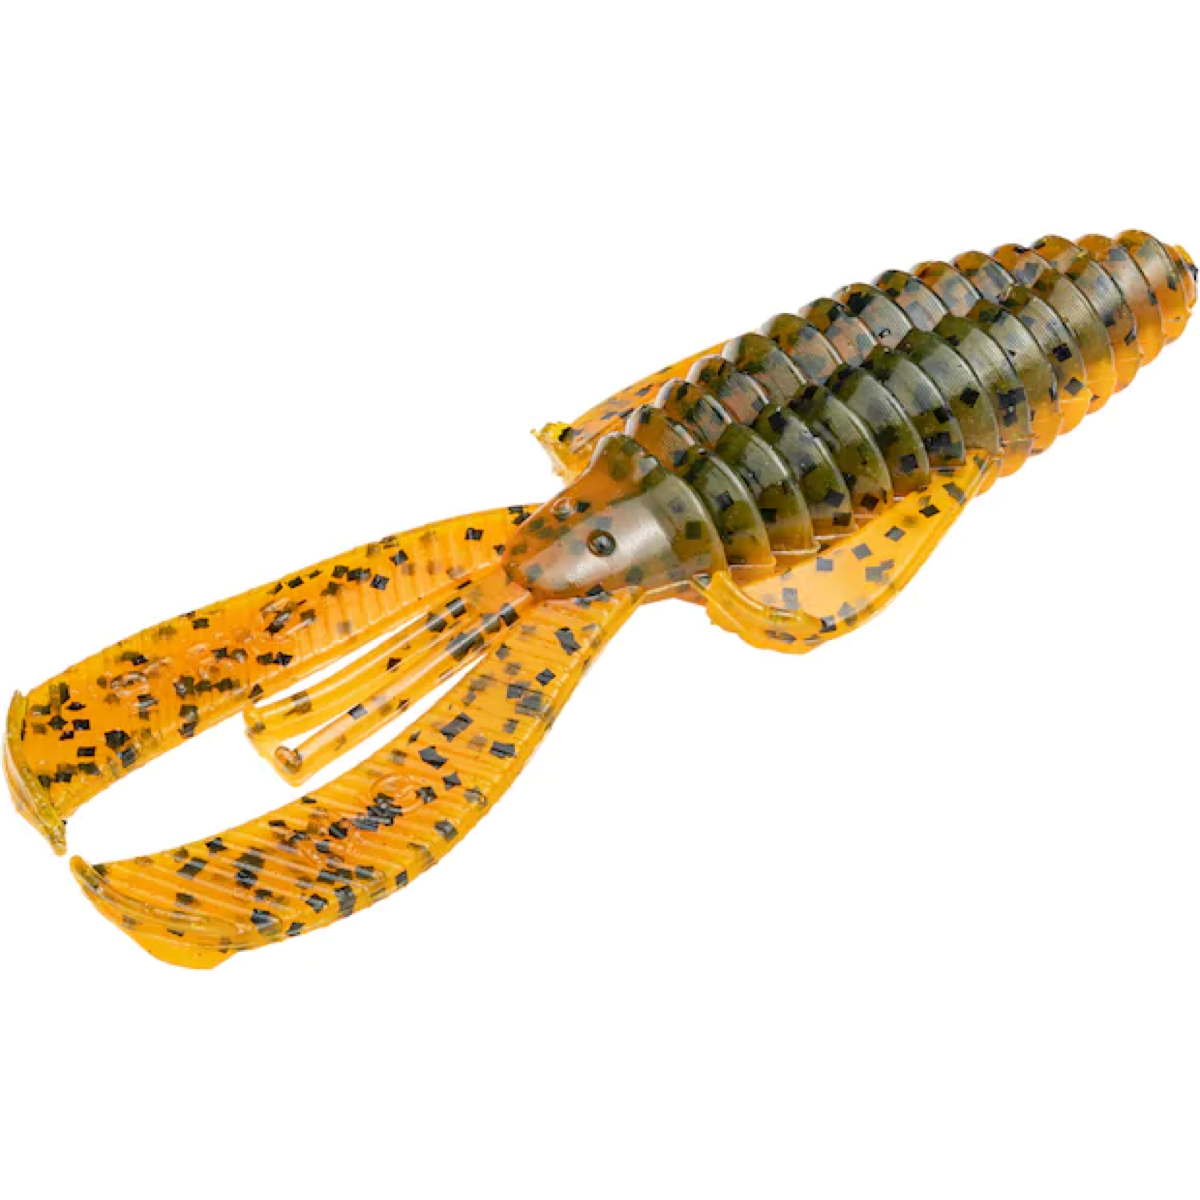 Photo of Strike King Rage Baby Bug for sale at United Tackle Shops.